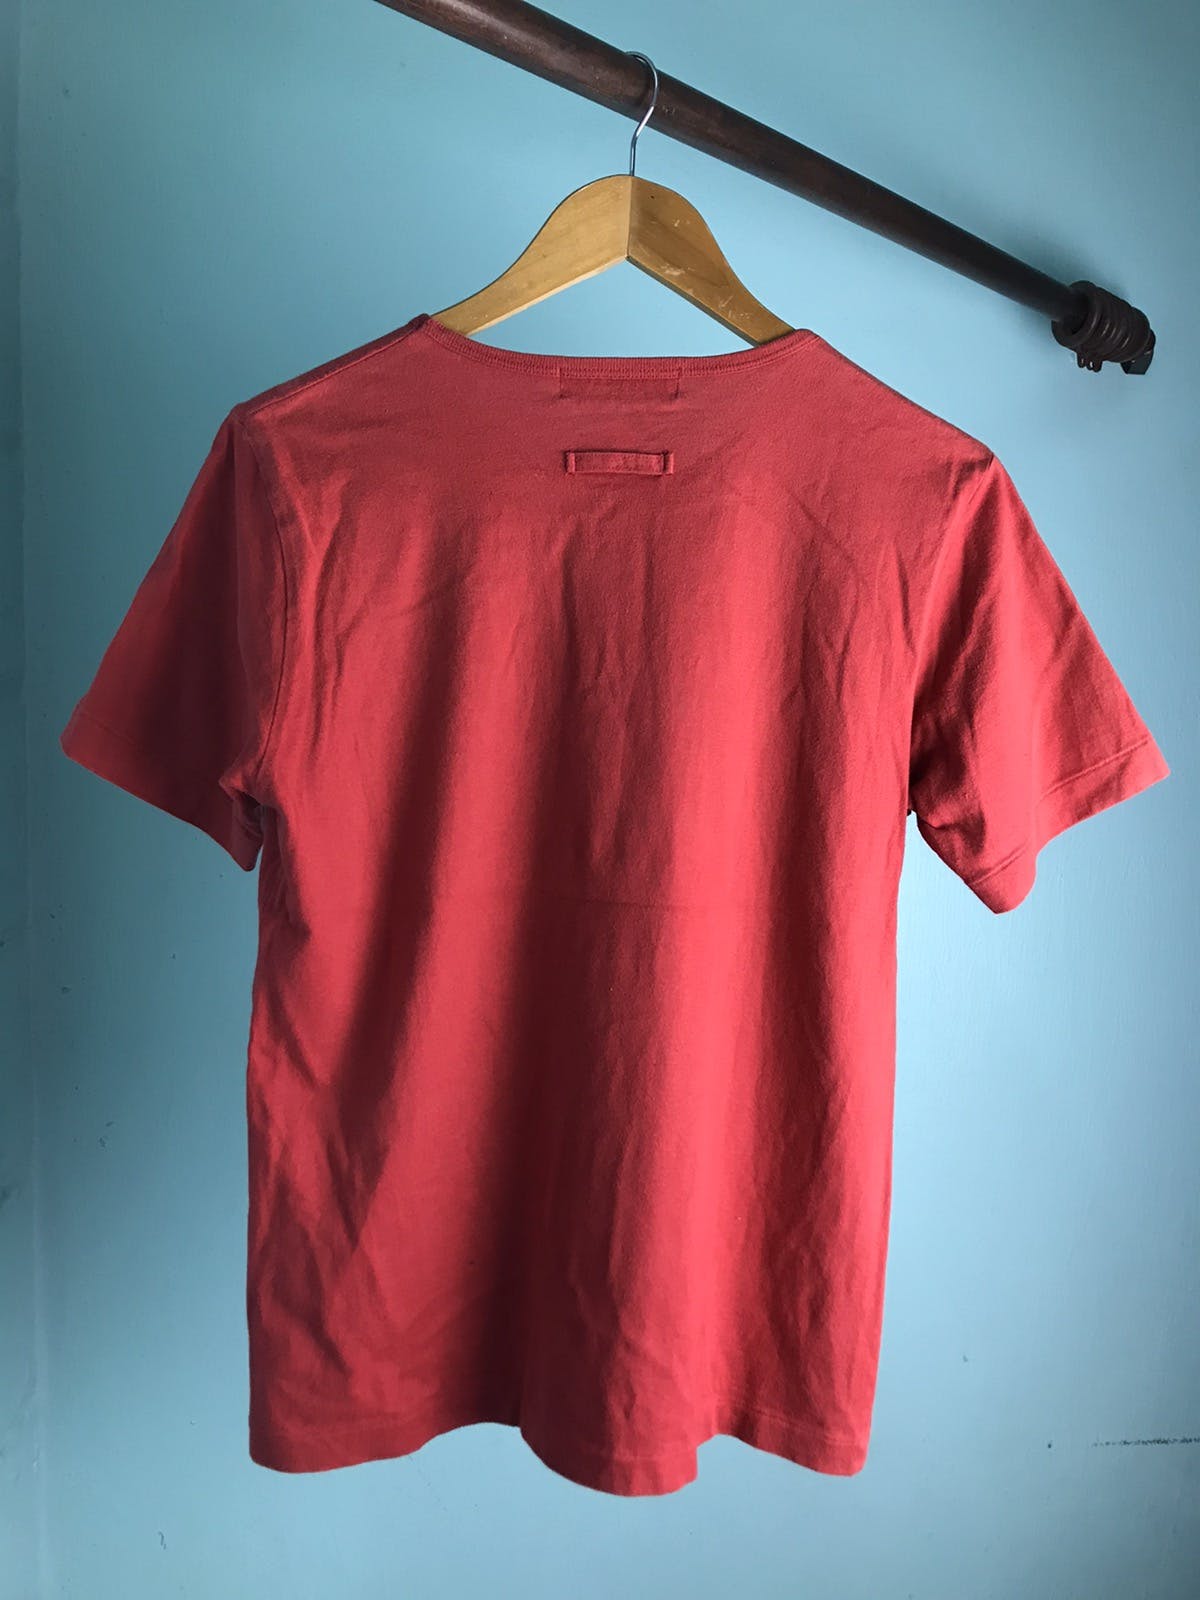 Vintage Gaultier Homme Object tee - 9